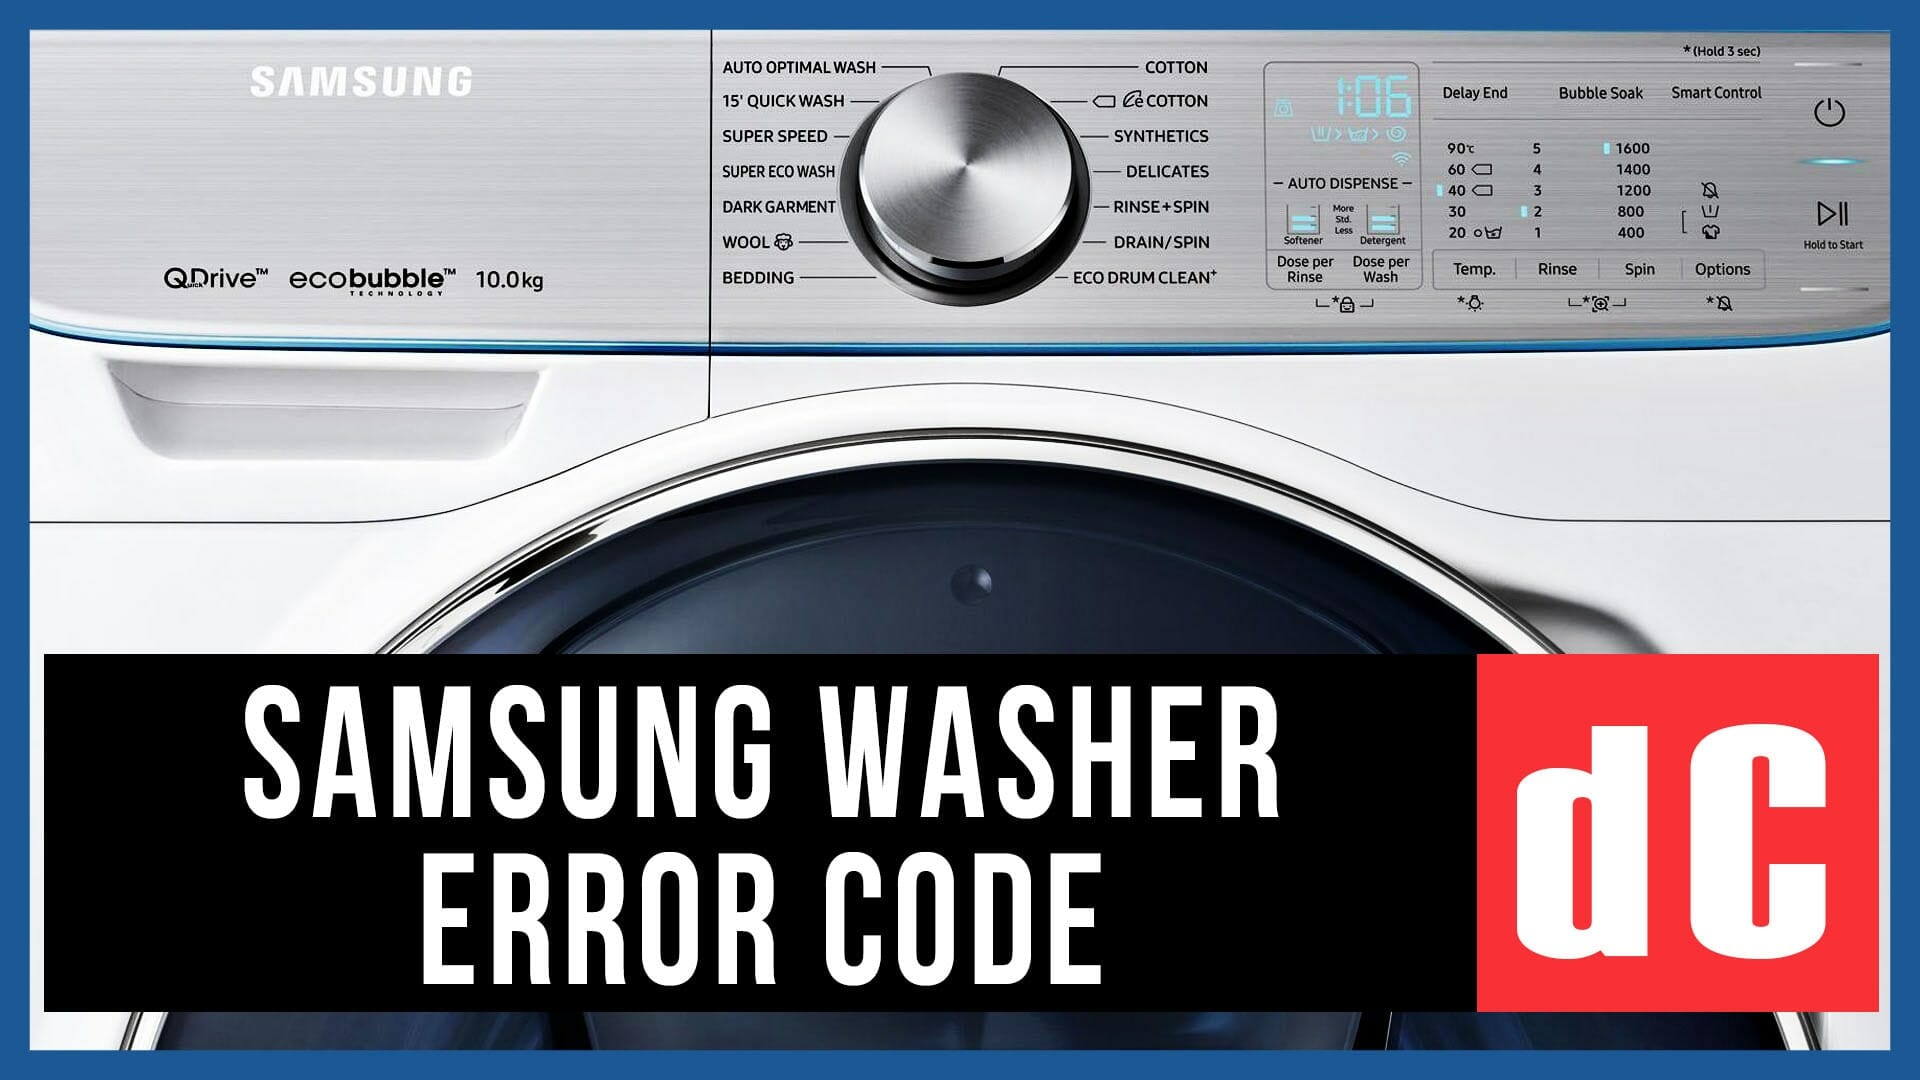 samsung-washer-error-code-dc-old-and-top-load-models-causes-how